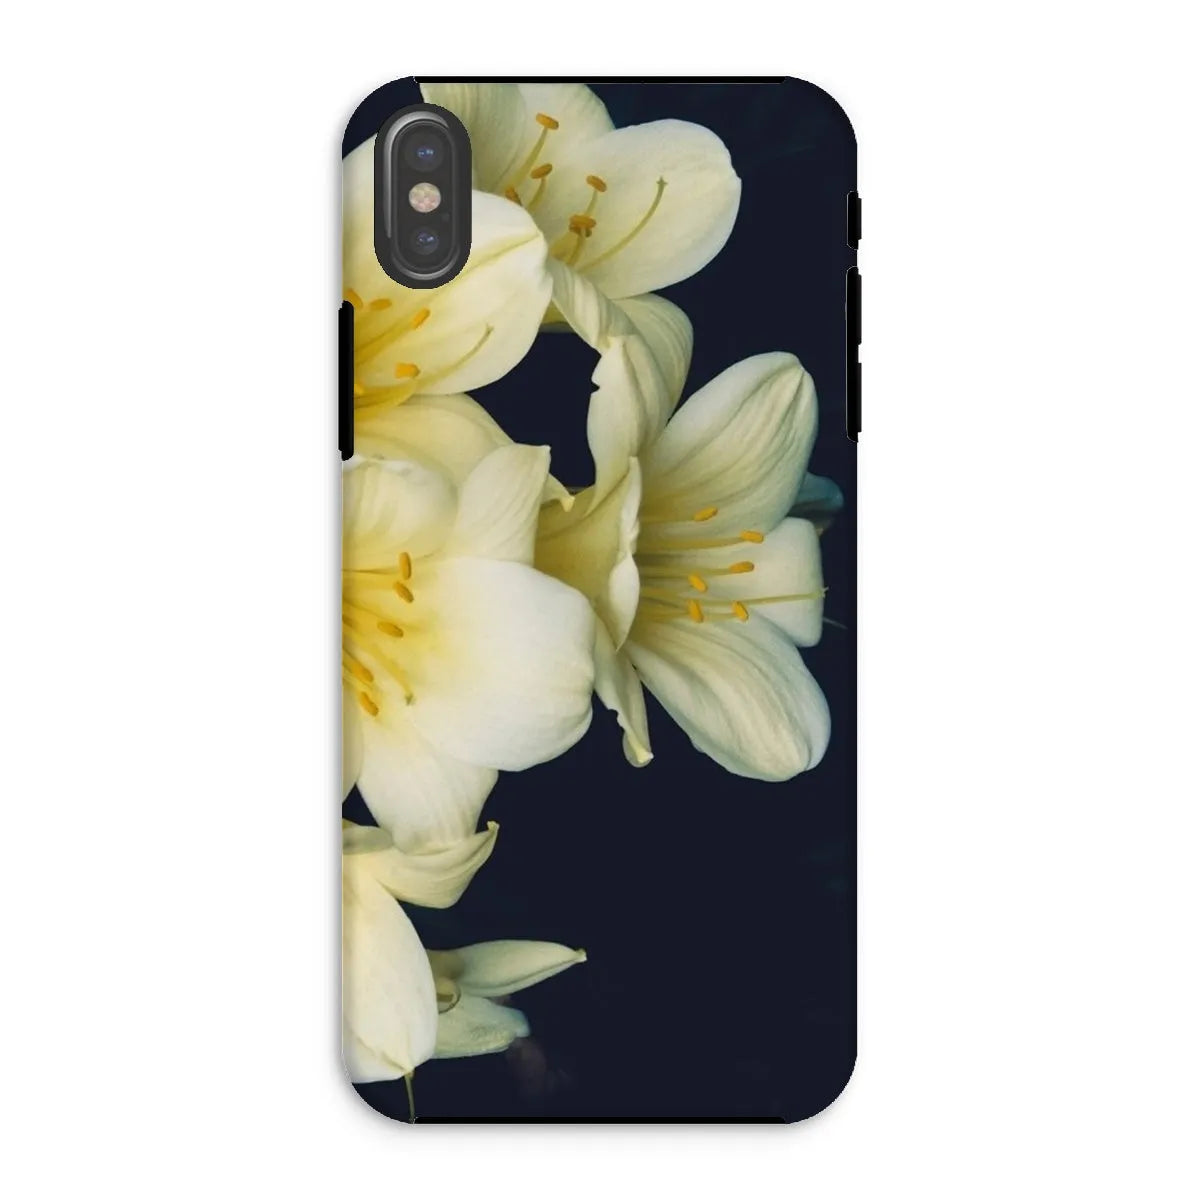 Flower Power Too Tough Phone Case - Iphone Xs / Matte - Mobile Phone Cases - Aesthetic Art